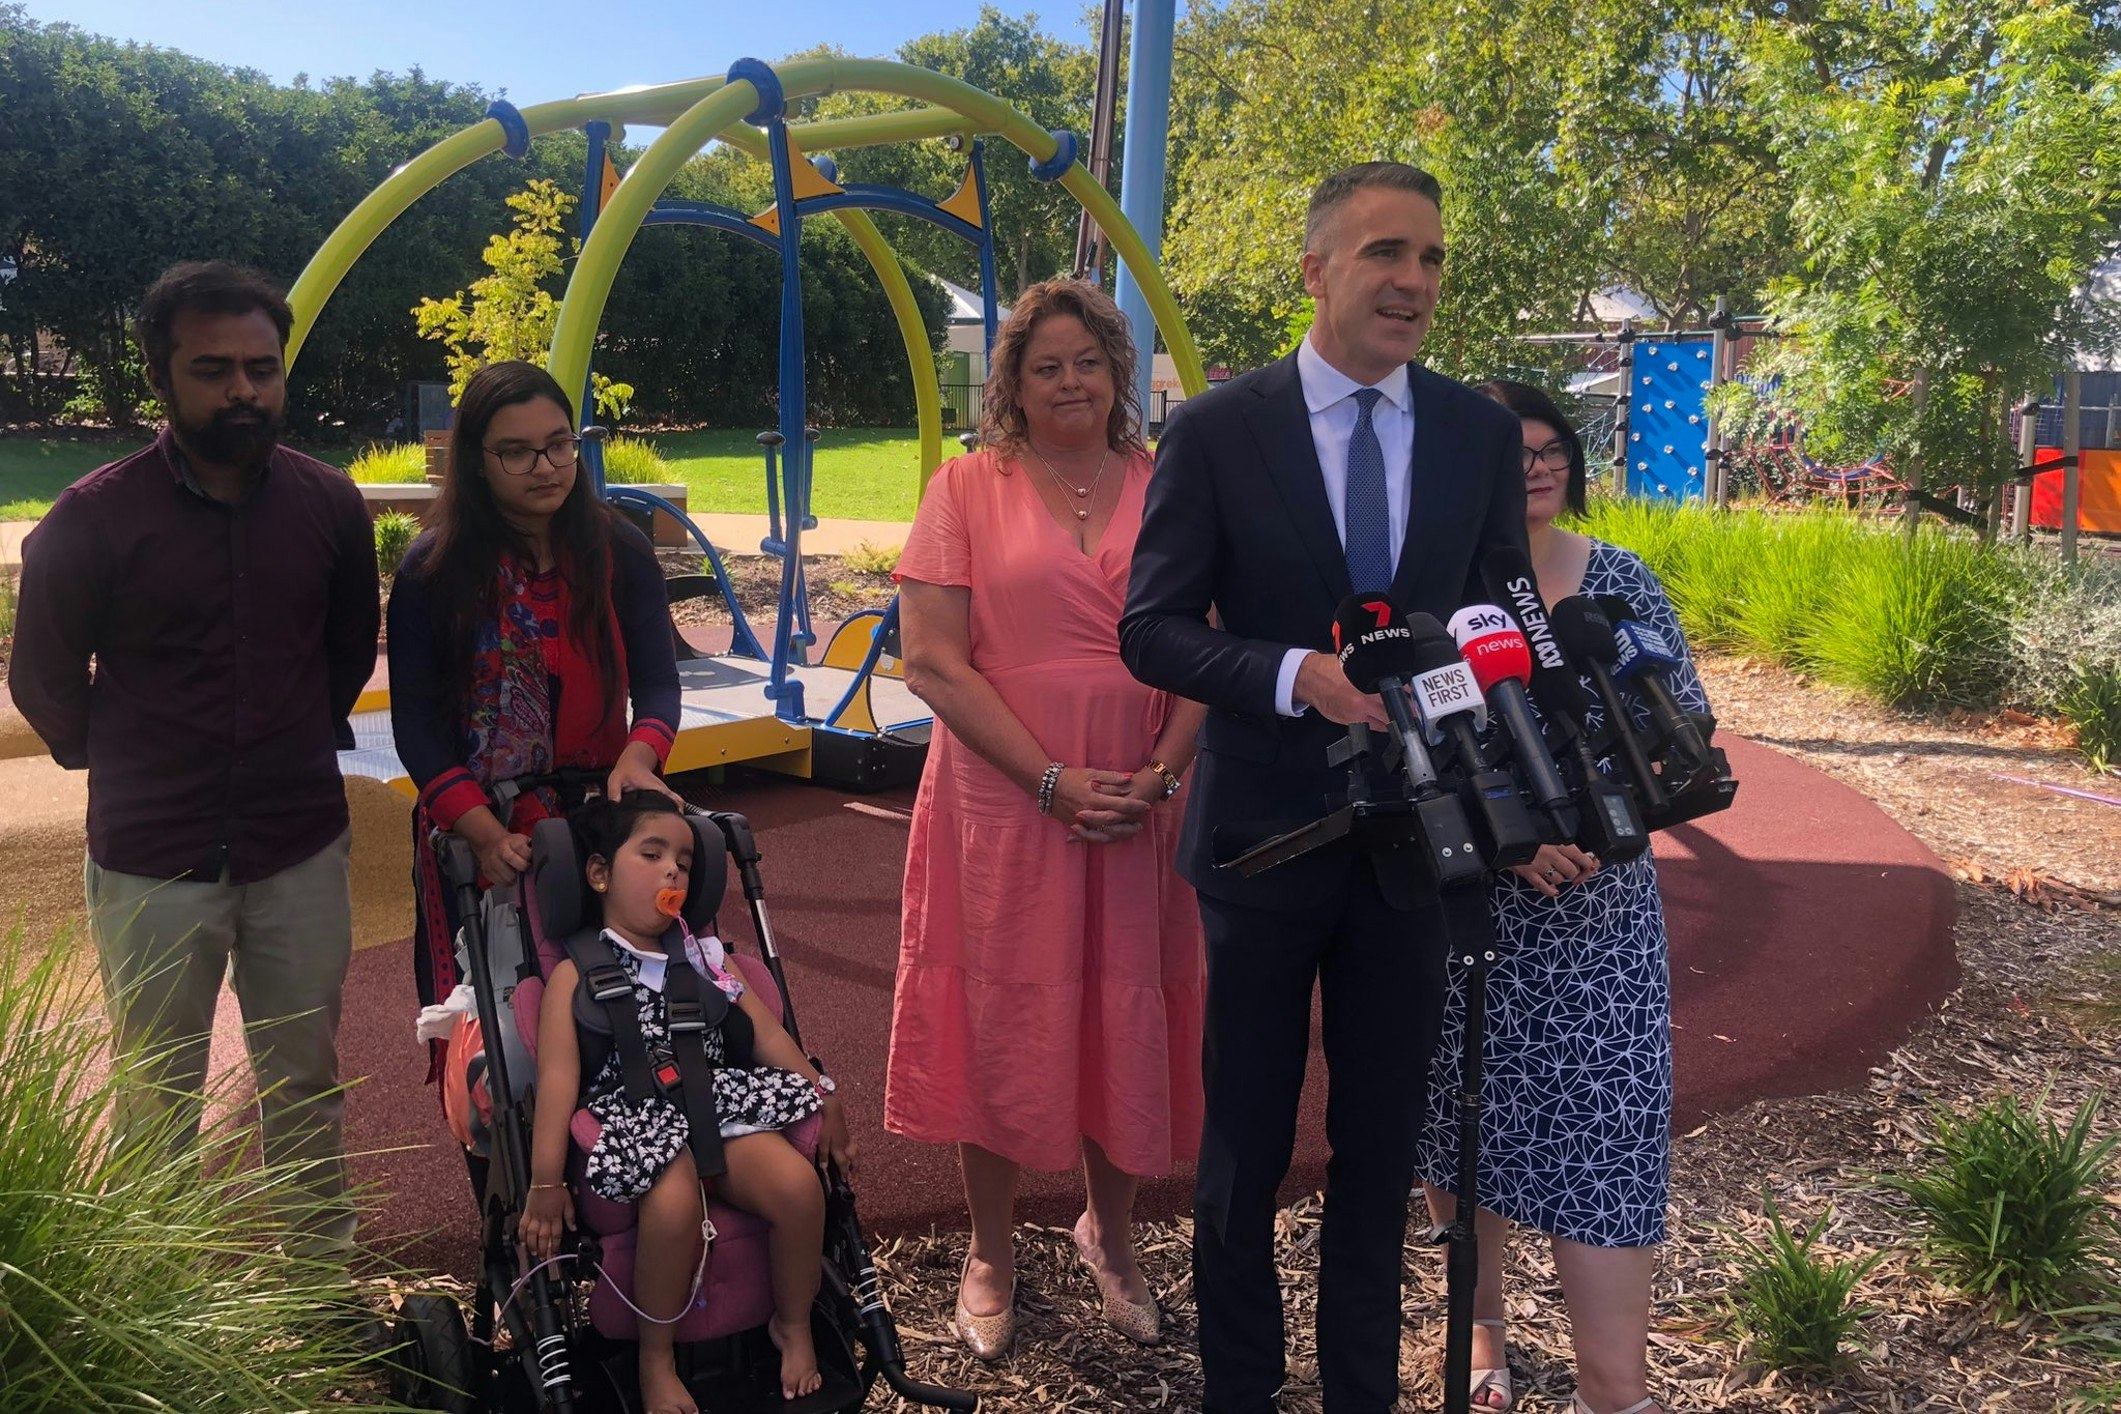 South Australian Premier, Peter Malinauskas announcing the funding with Human Services Minister, Nat Cook, Tourism Minister, Zoe Bettison and a family from Bangladesh who will benefit from the pledge. [Source: Twitter]
